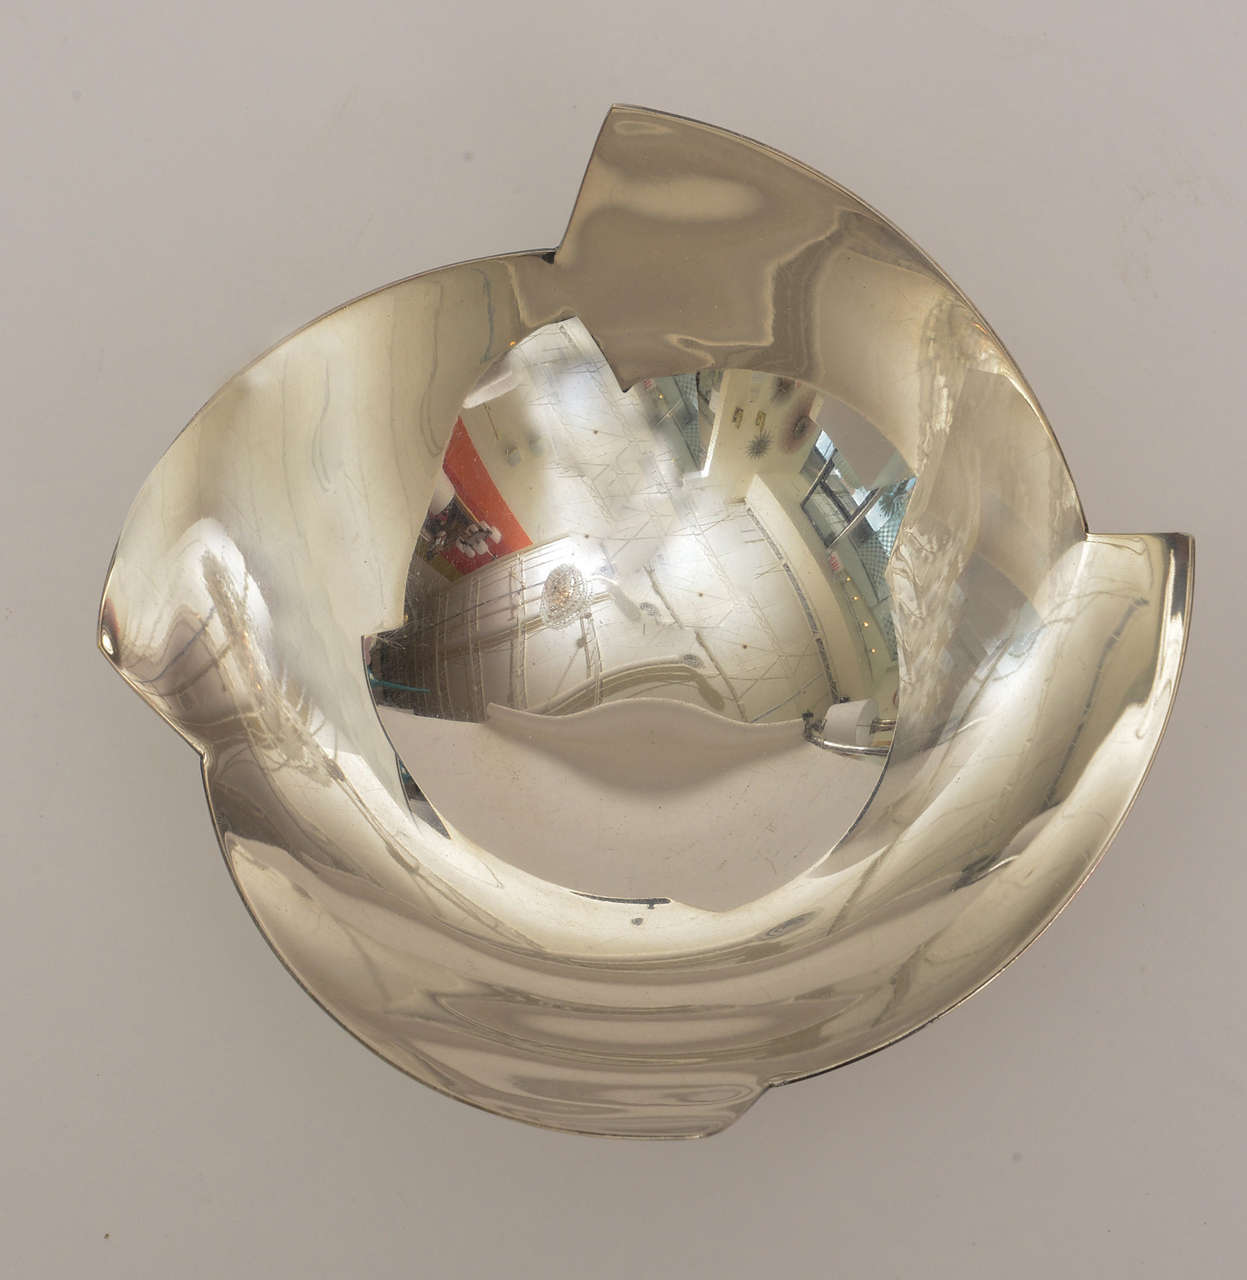 20th Century Signed Sculptural Silver Plate Bowl by Elsa Rady for Swid Powell